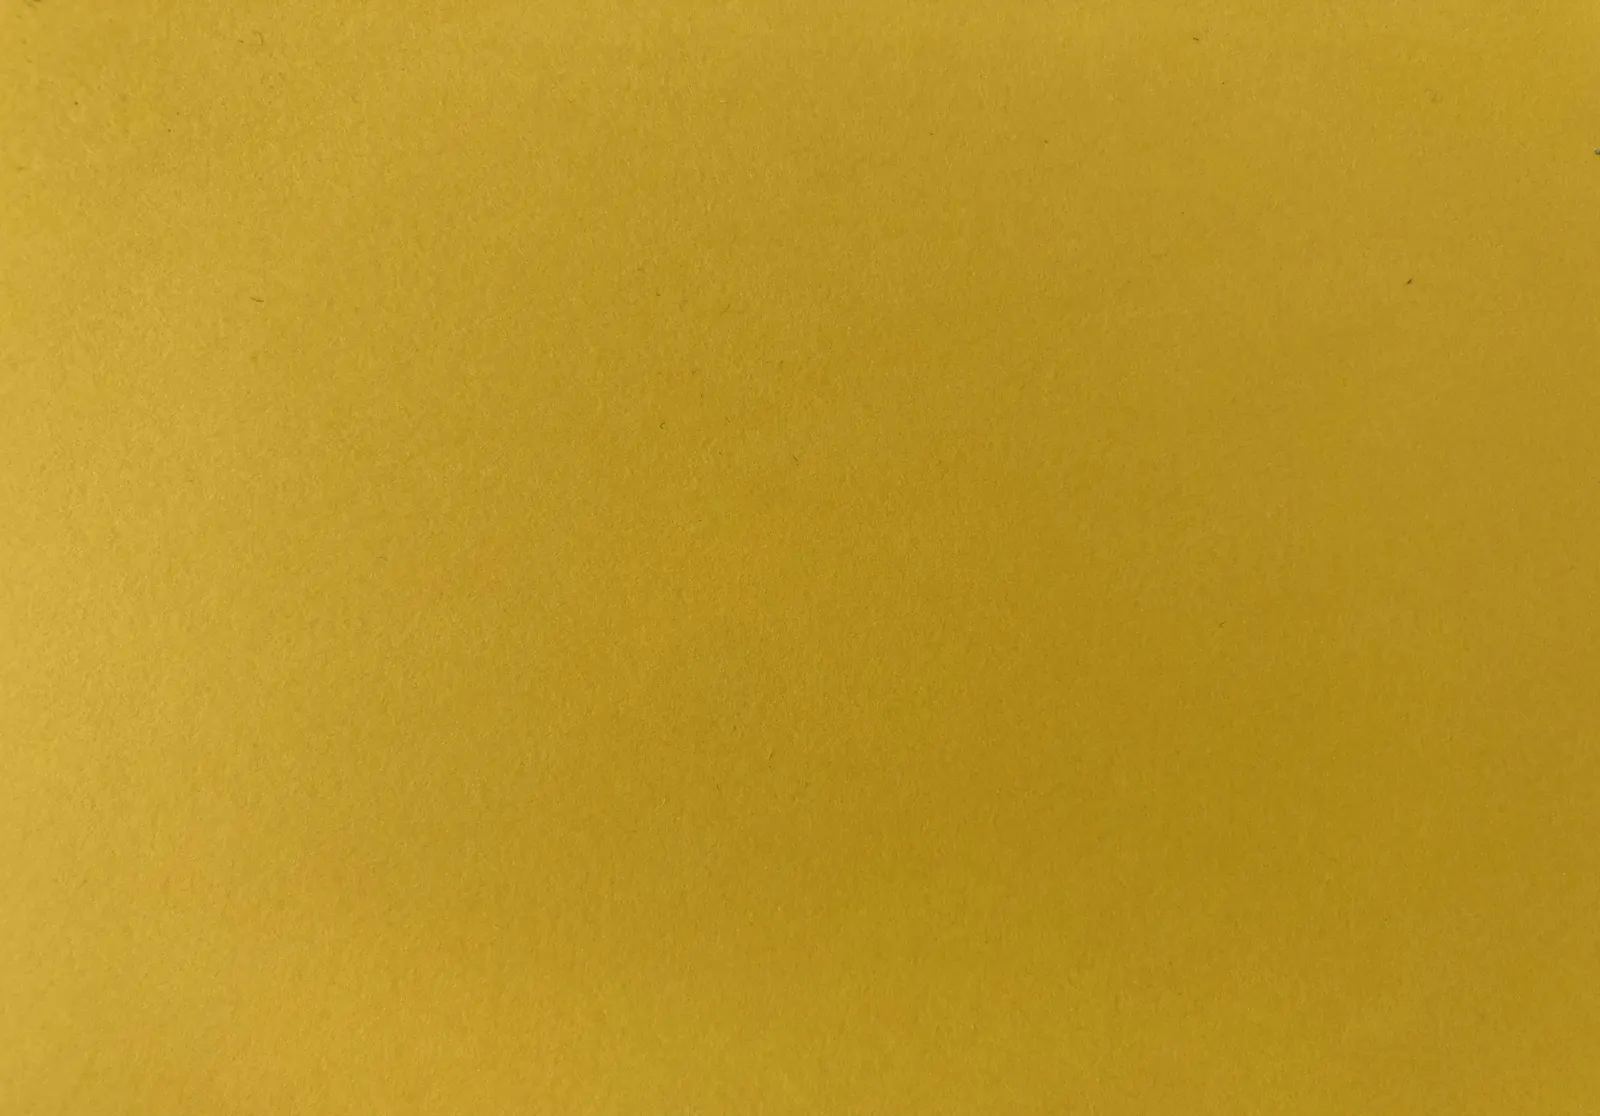 A yellow post it, as yellow as the late August sun